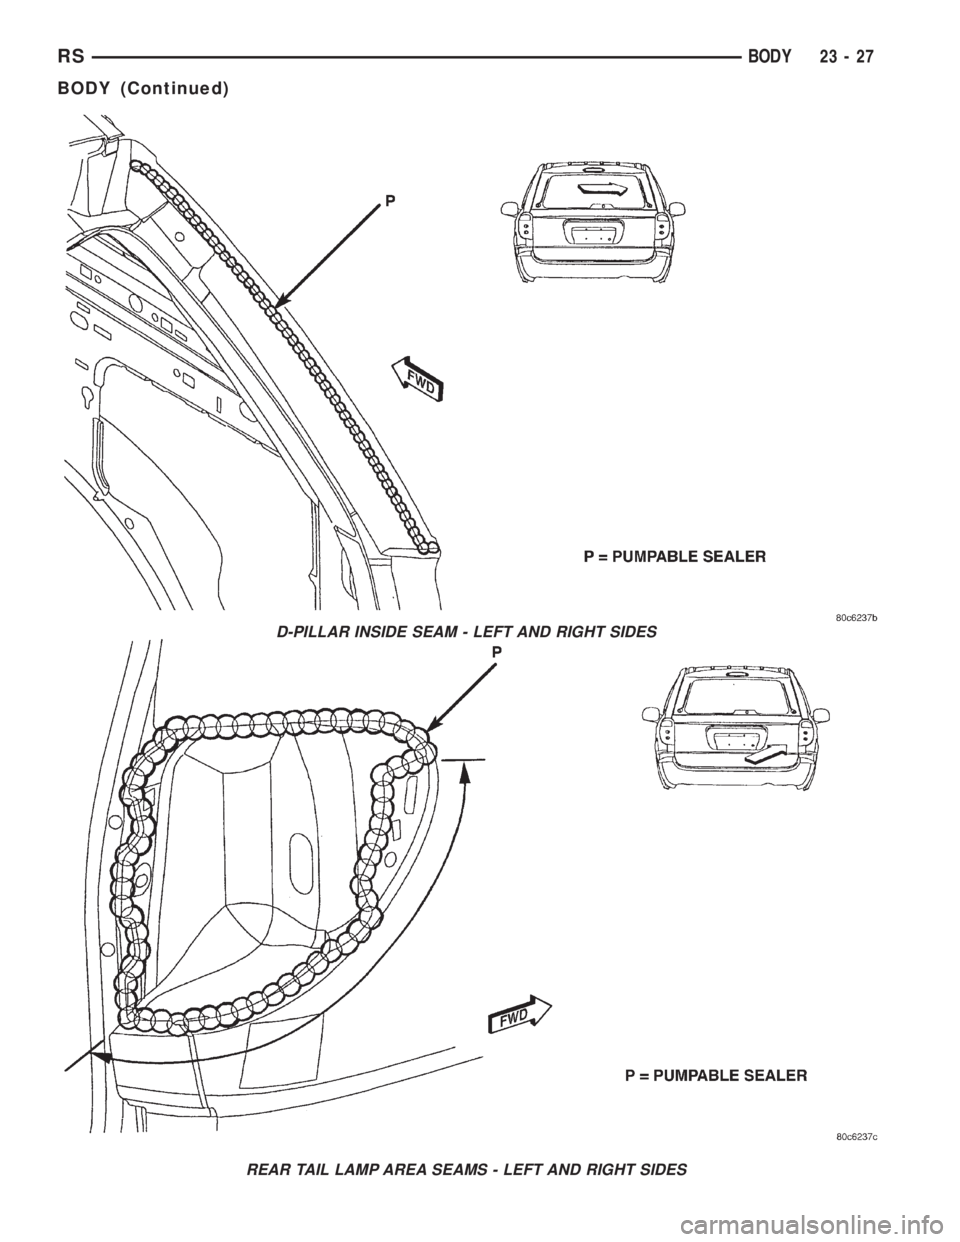 CHRYSLER VOYAGER 2001  Service Manual D-PILLAR INSIDE SEAM - LEFT AND RIGHT SIDES
REAR TAIL LAMP AREA SEAMS - LEFT AND RIGHT SIDES
RSBODY23-27
BODY (Continued) 